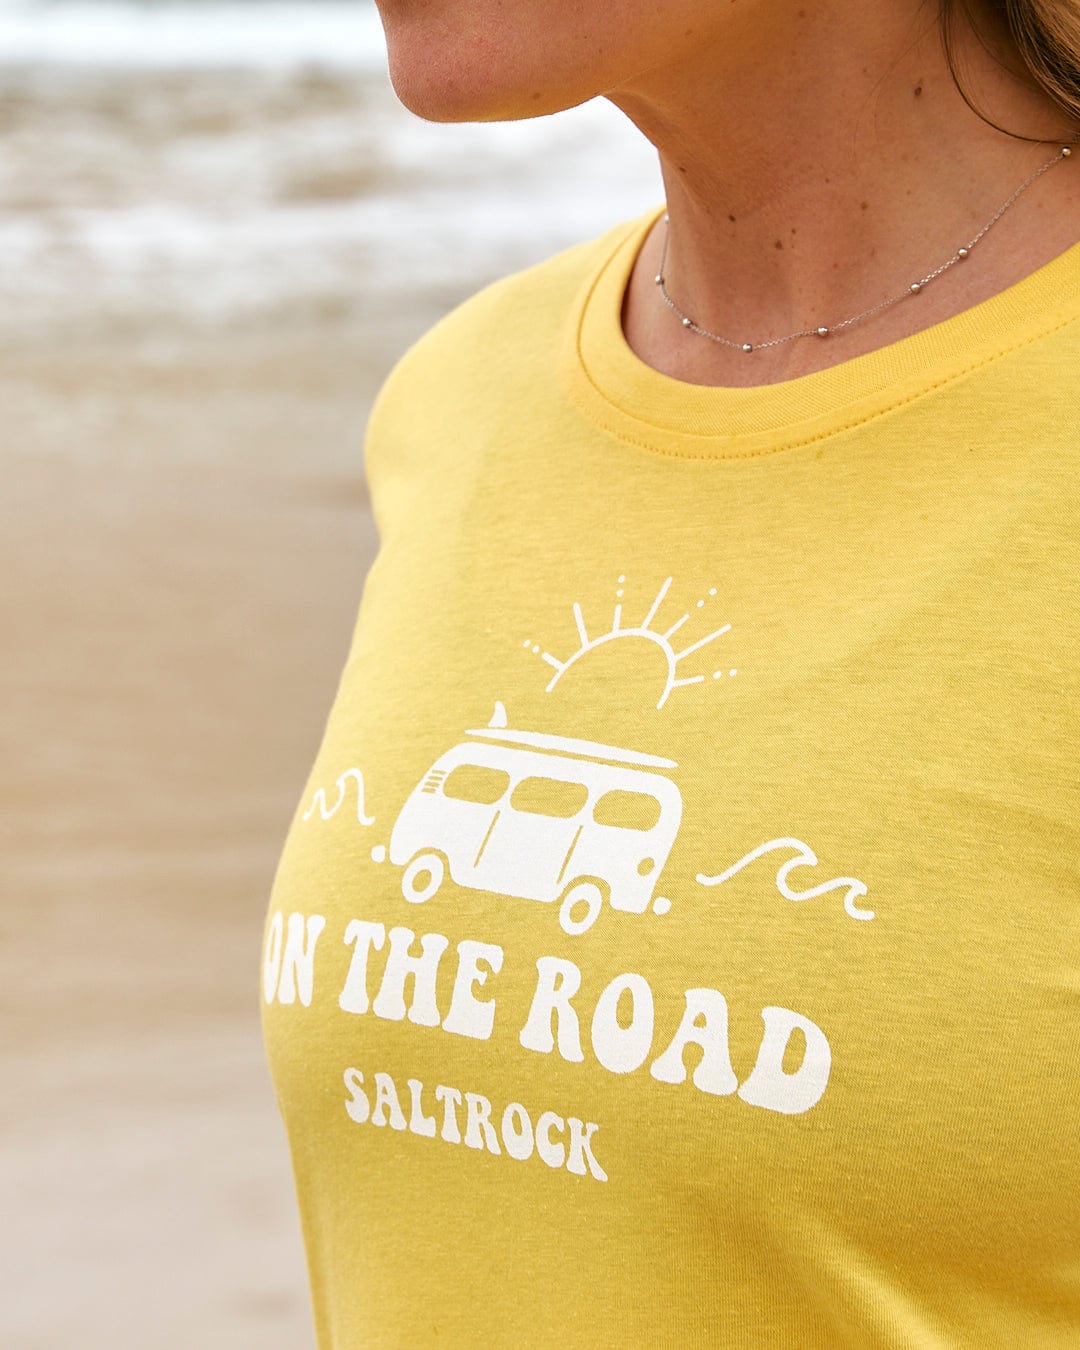 A woman wearing a yellow t-shirt that says "On The Road" by Saltrock.